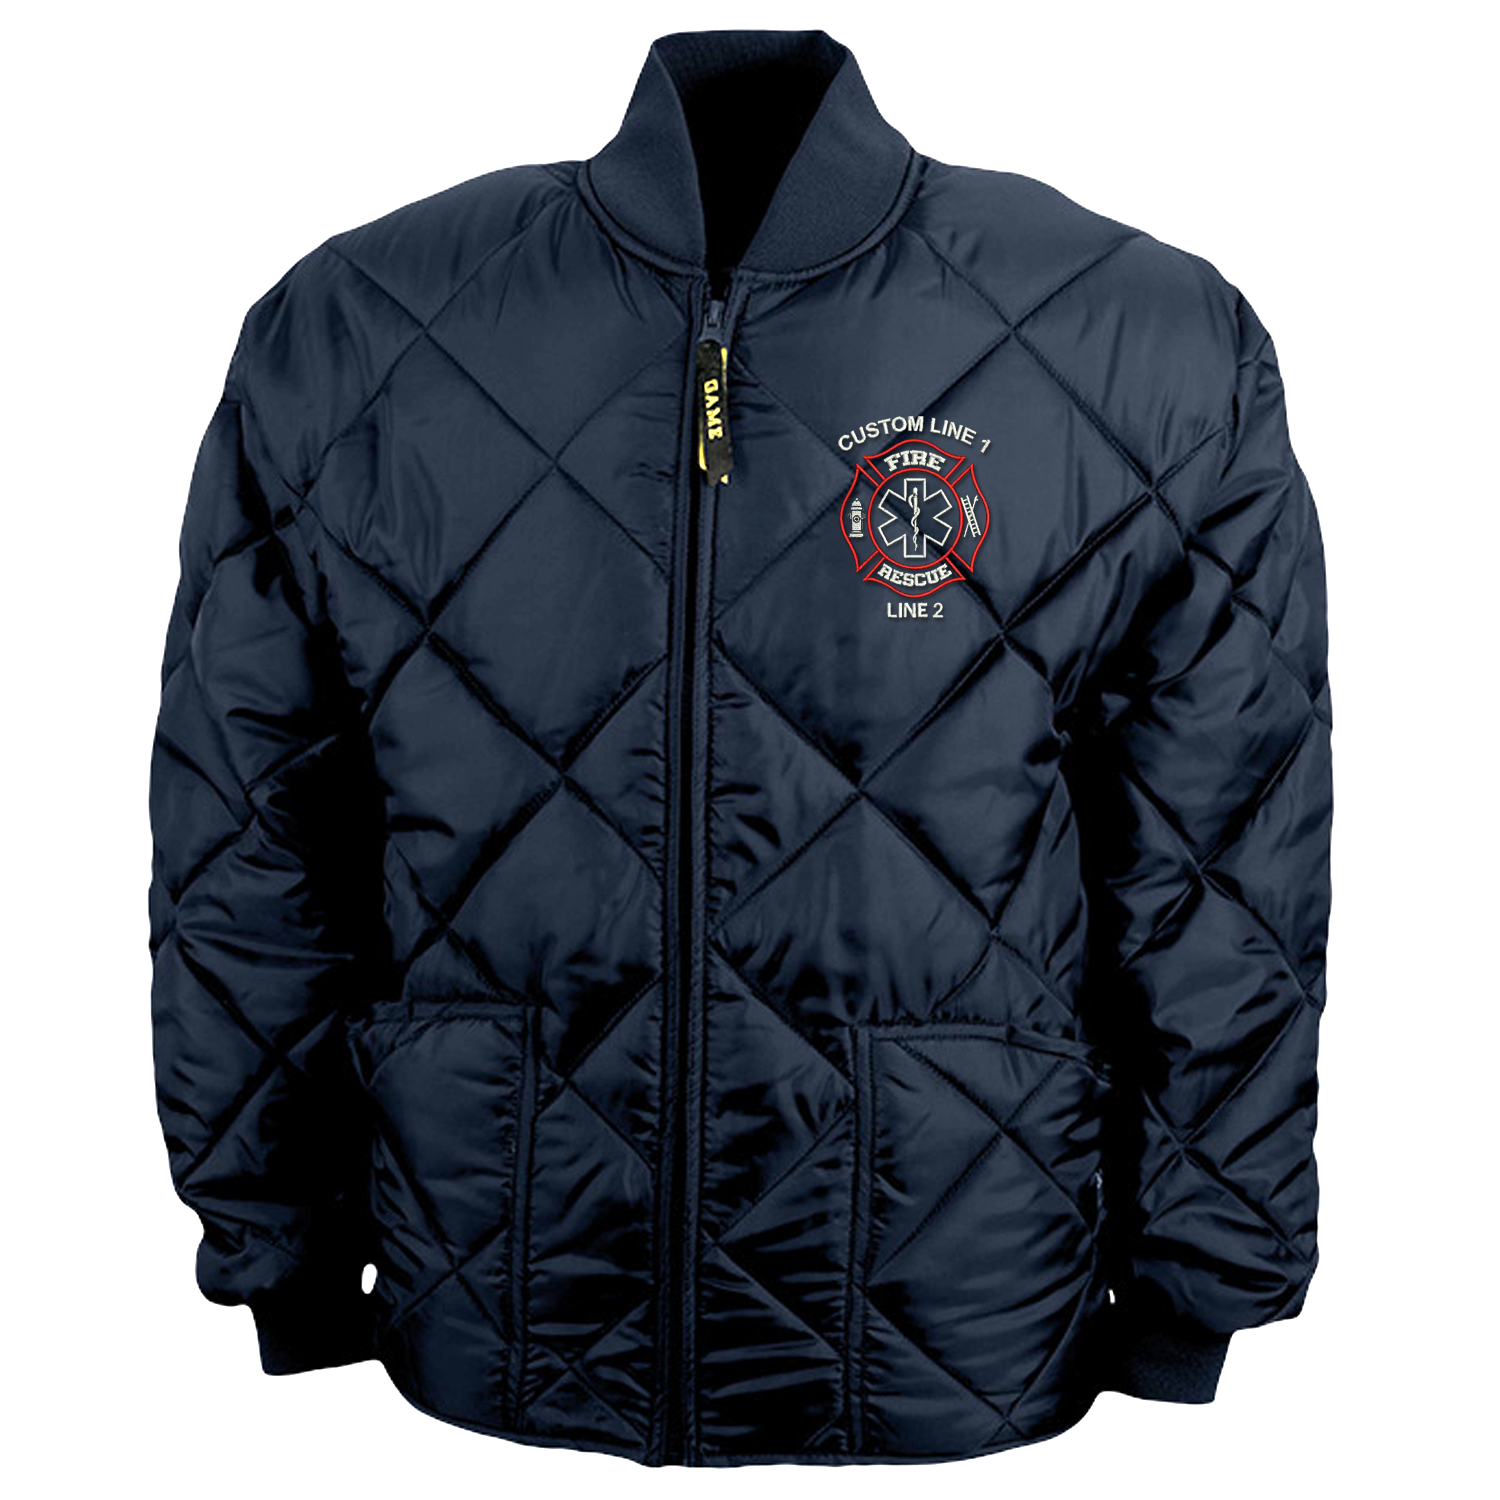 Image of Customized Game The Bravest Jacket with Fire Rescue Embroidery